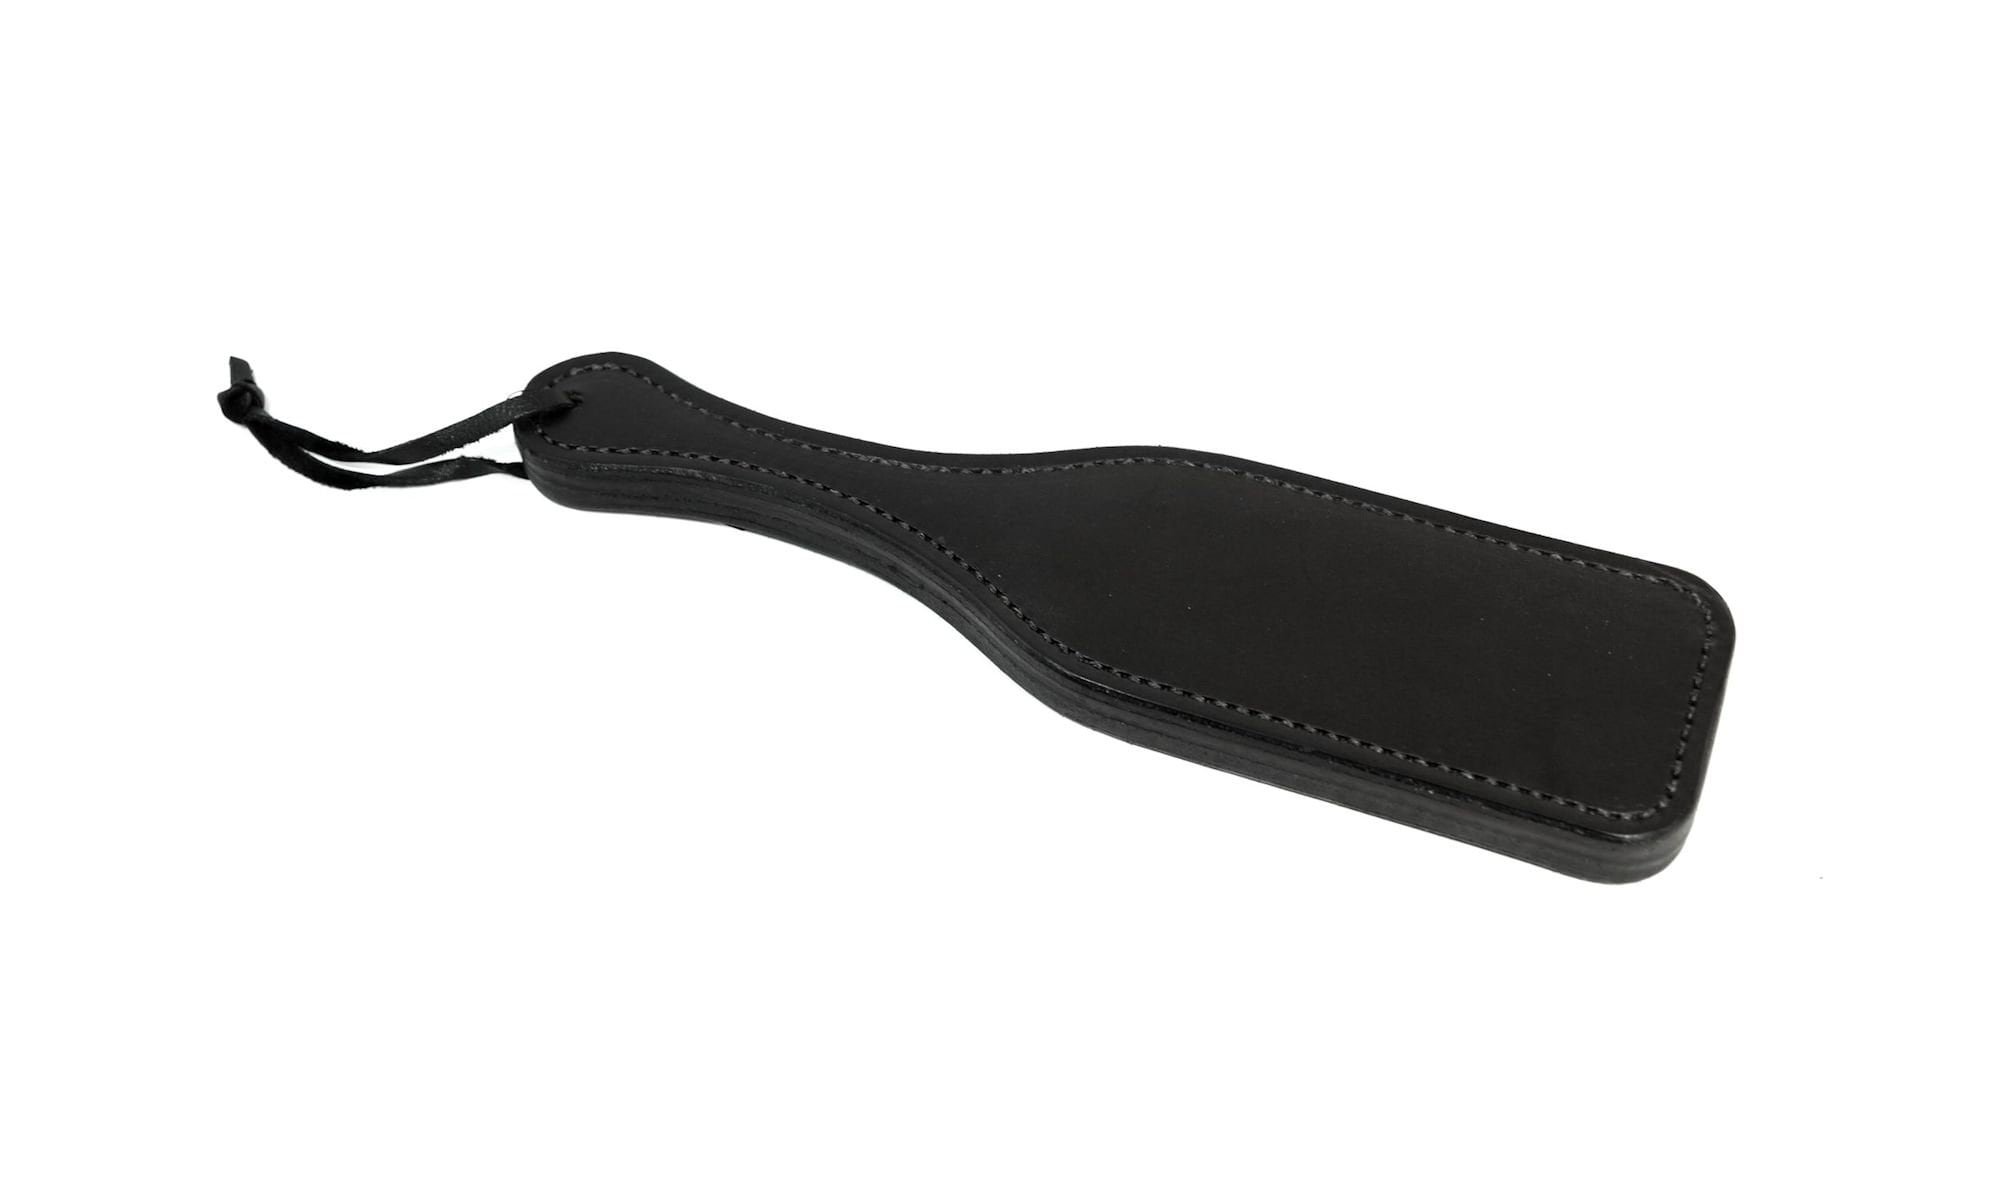 Heavy 12 Inch 4 Layer Leather Paddle Choice of Stitching Color 